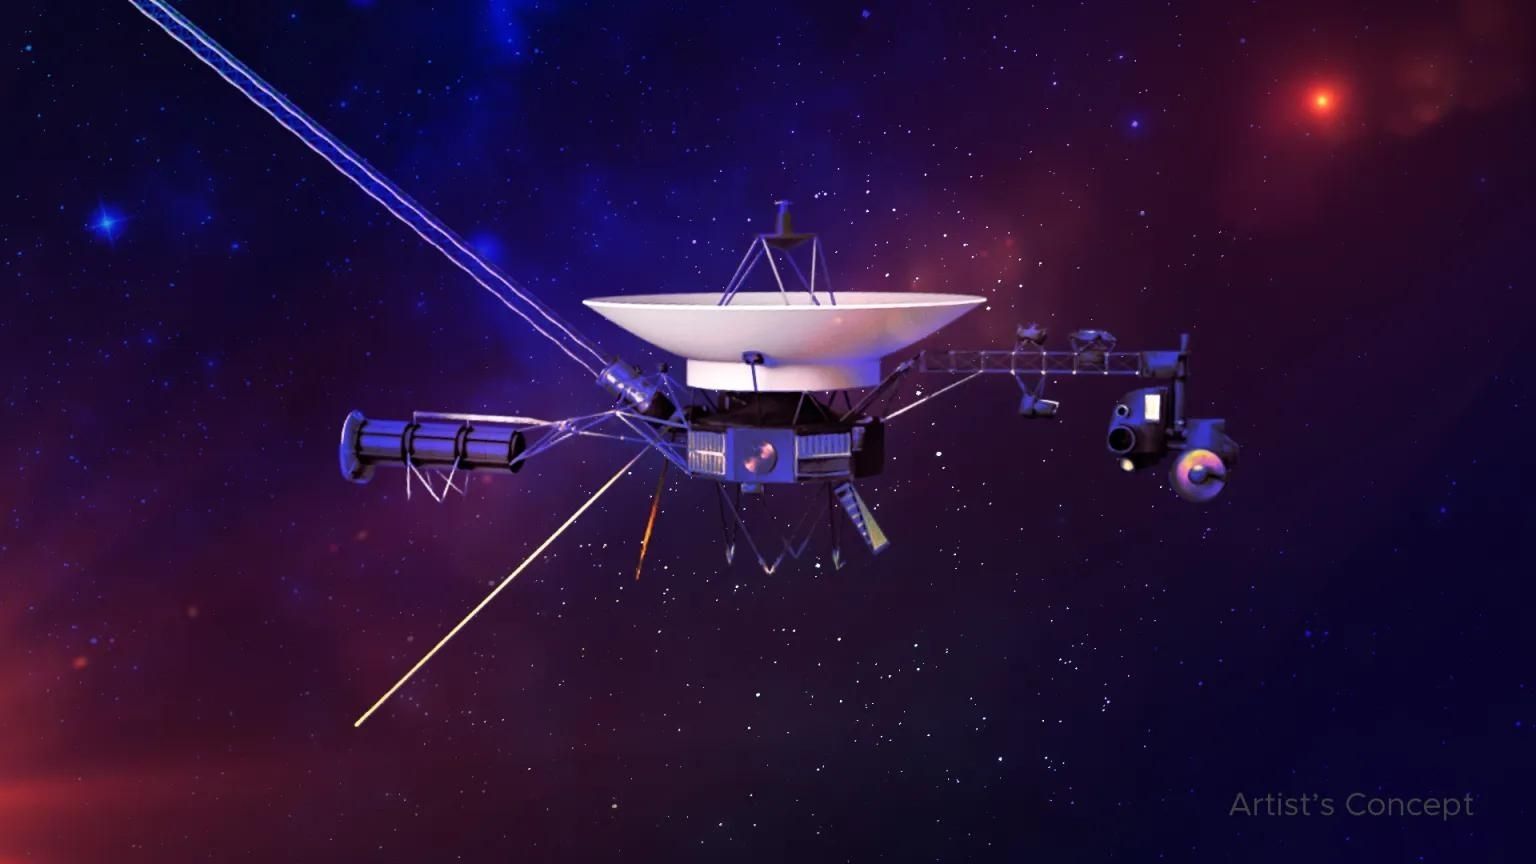  NASA engineers finally fix Voyager 1 spacecraft — from 15 billion miles away 